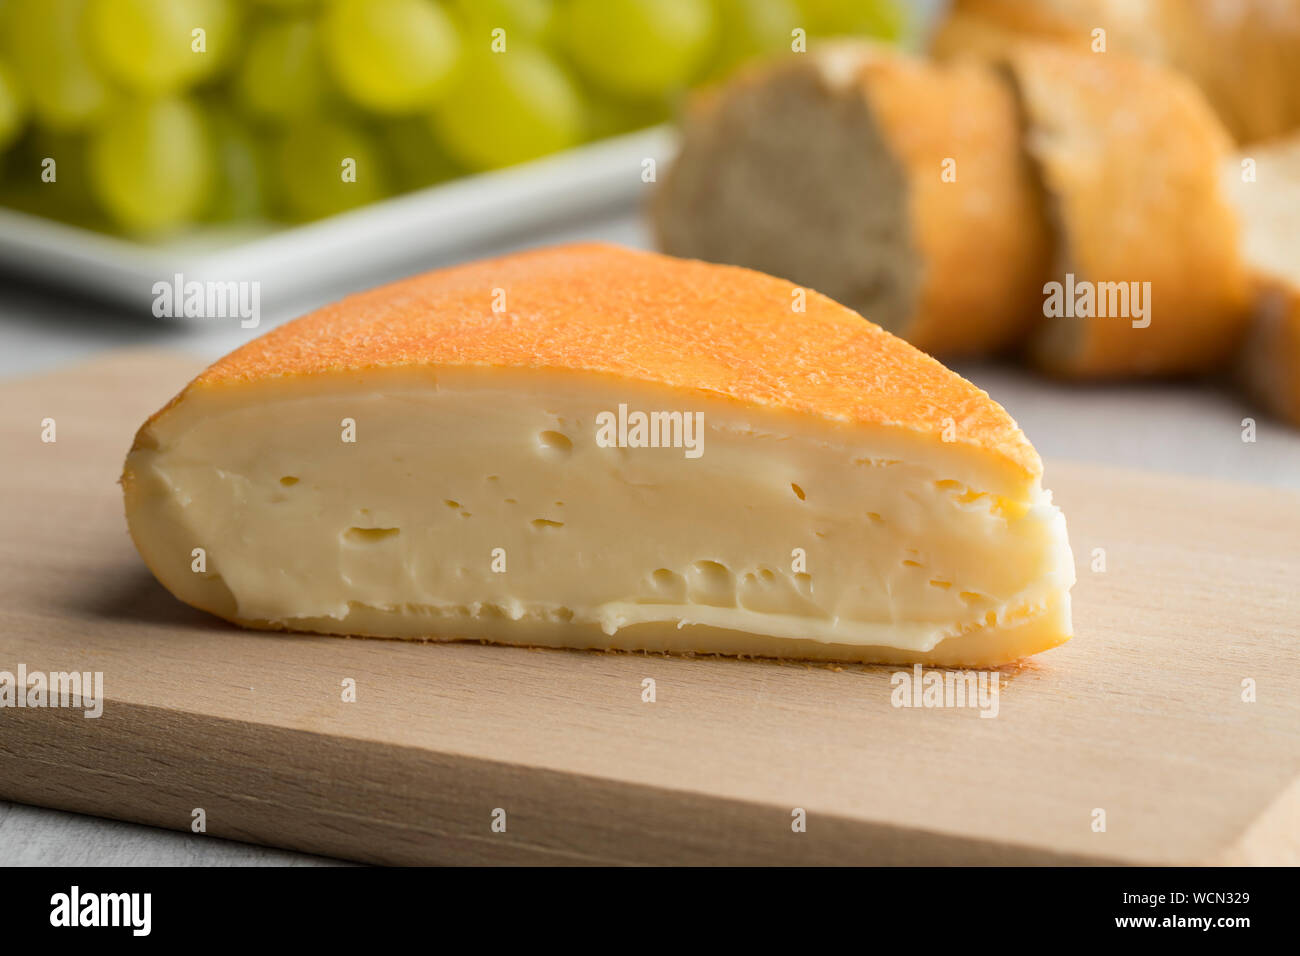 Piece of creamy French Chaumes cheese on a cutting board close up Stock Photo